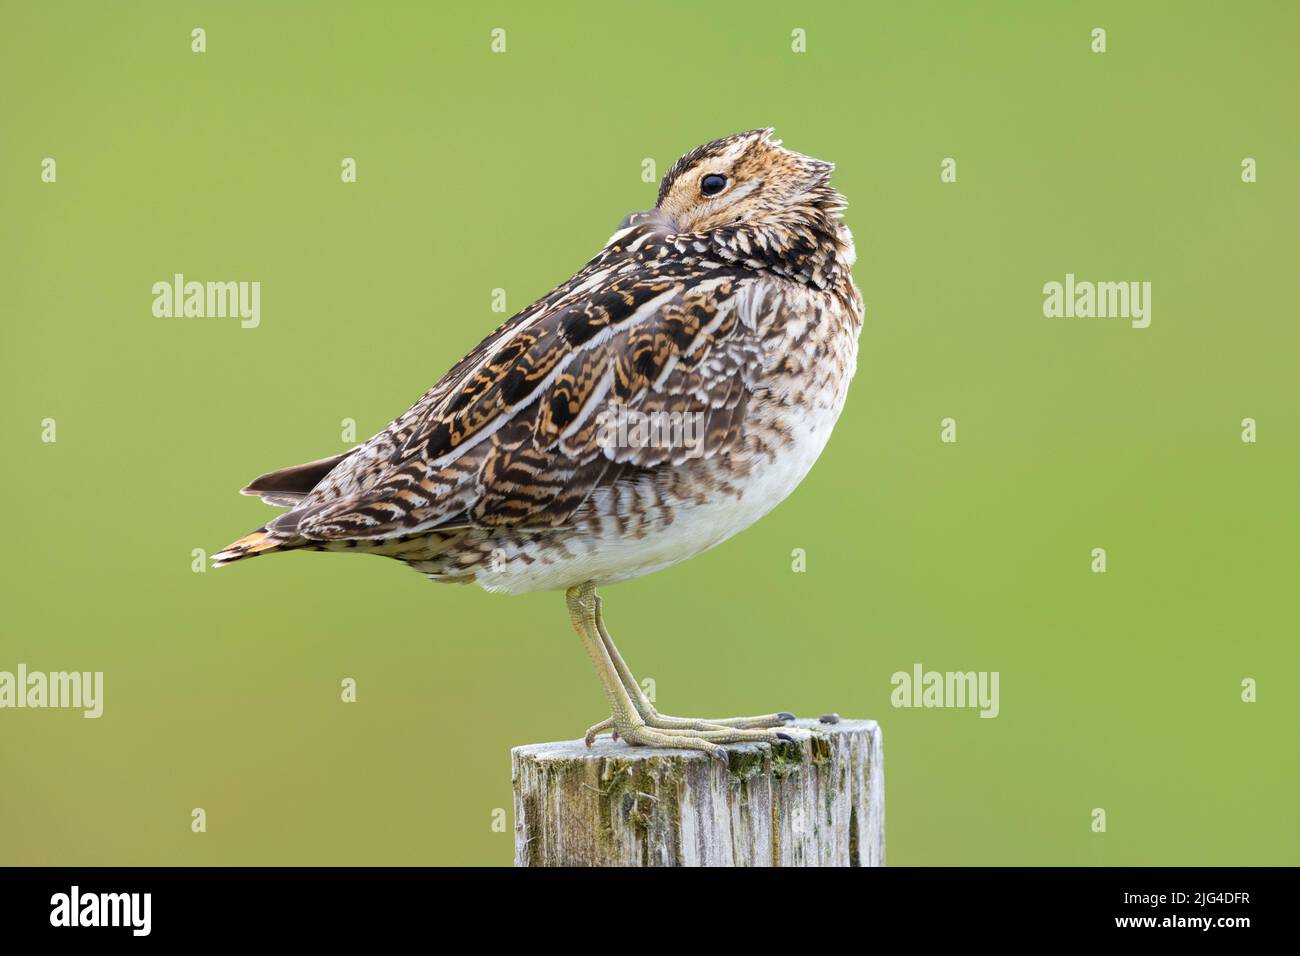 Common Snipe (Gallinago gallinago faeroeensis), side view of an adult sleeping on a fence post, Southern Region, Iceland Stock Photo